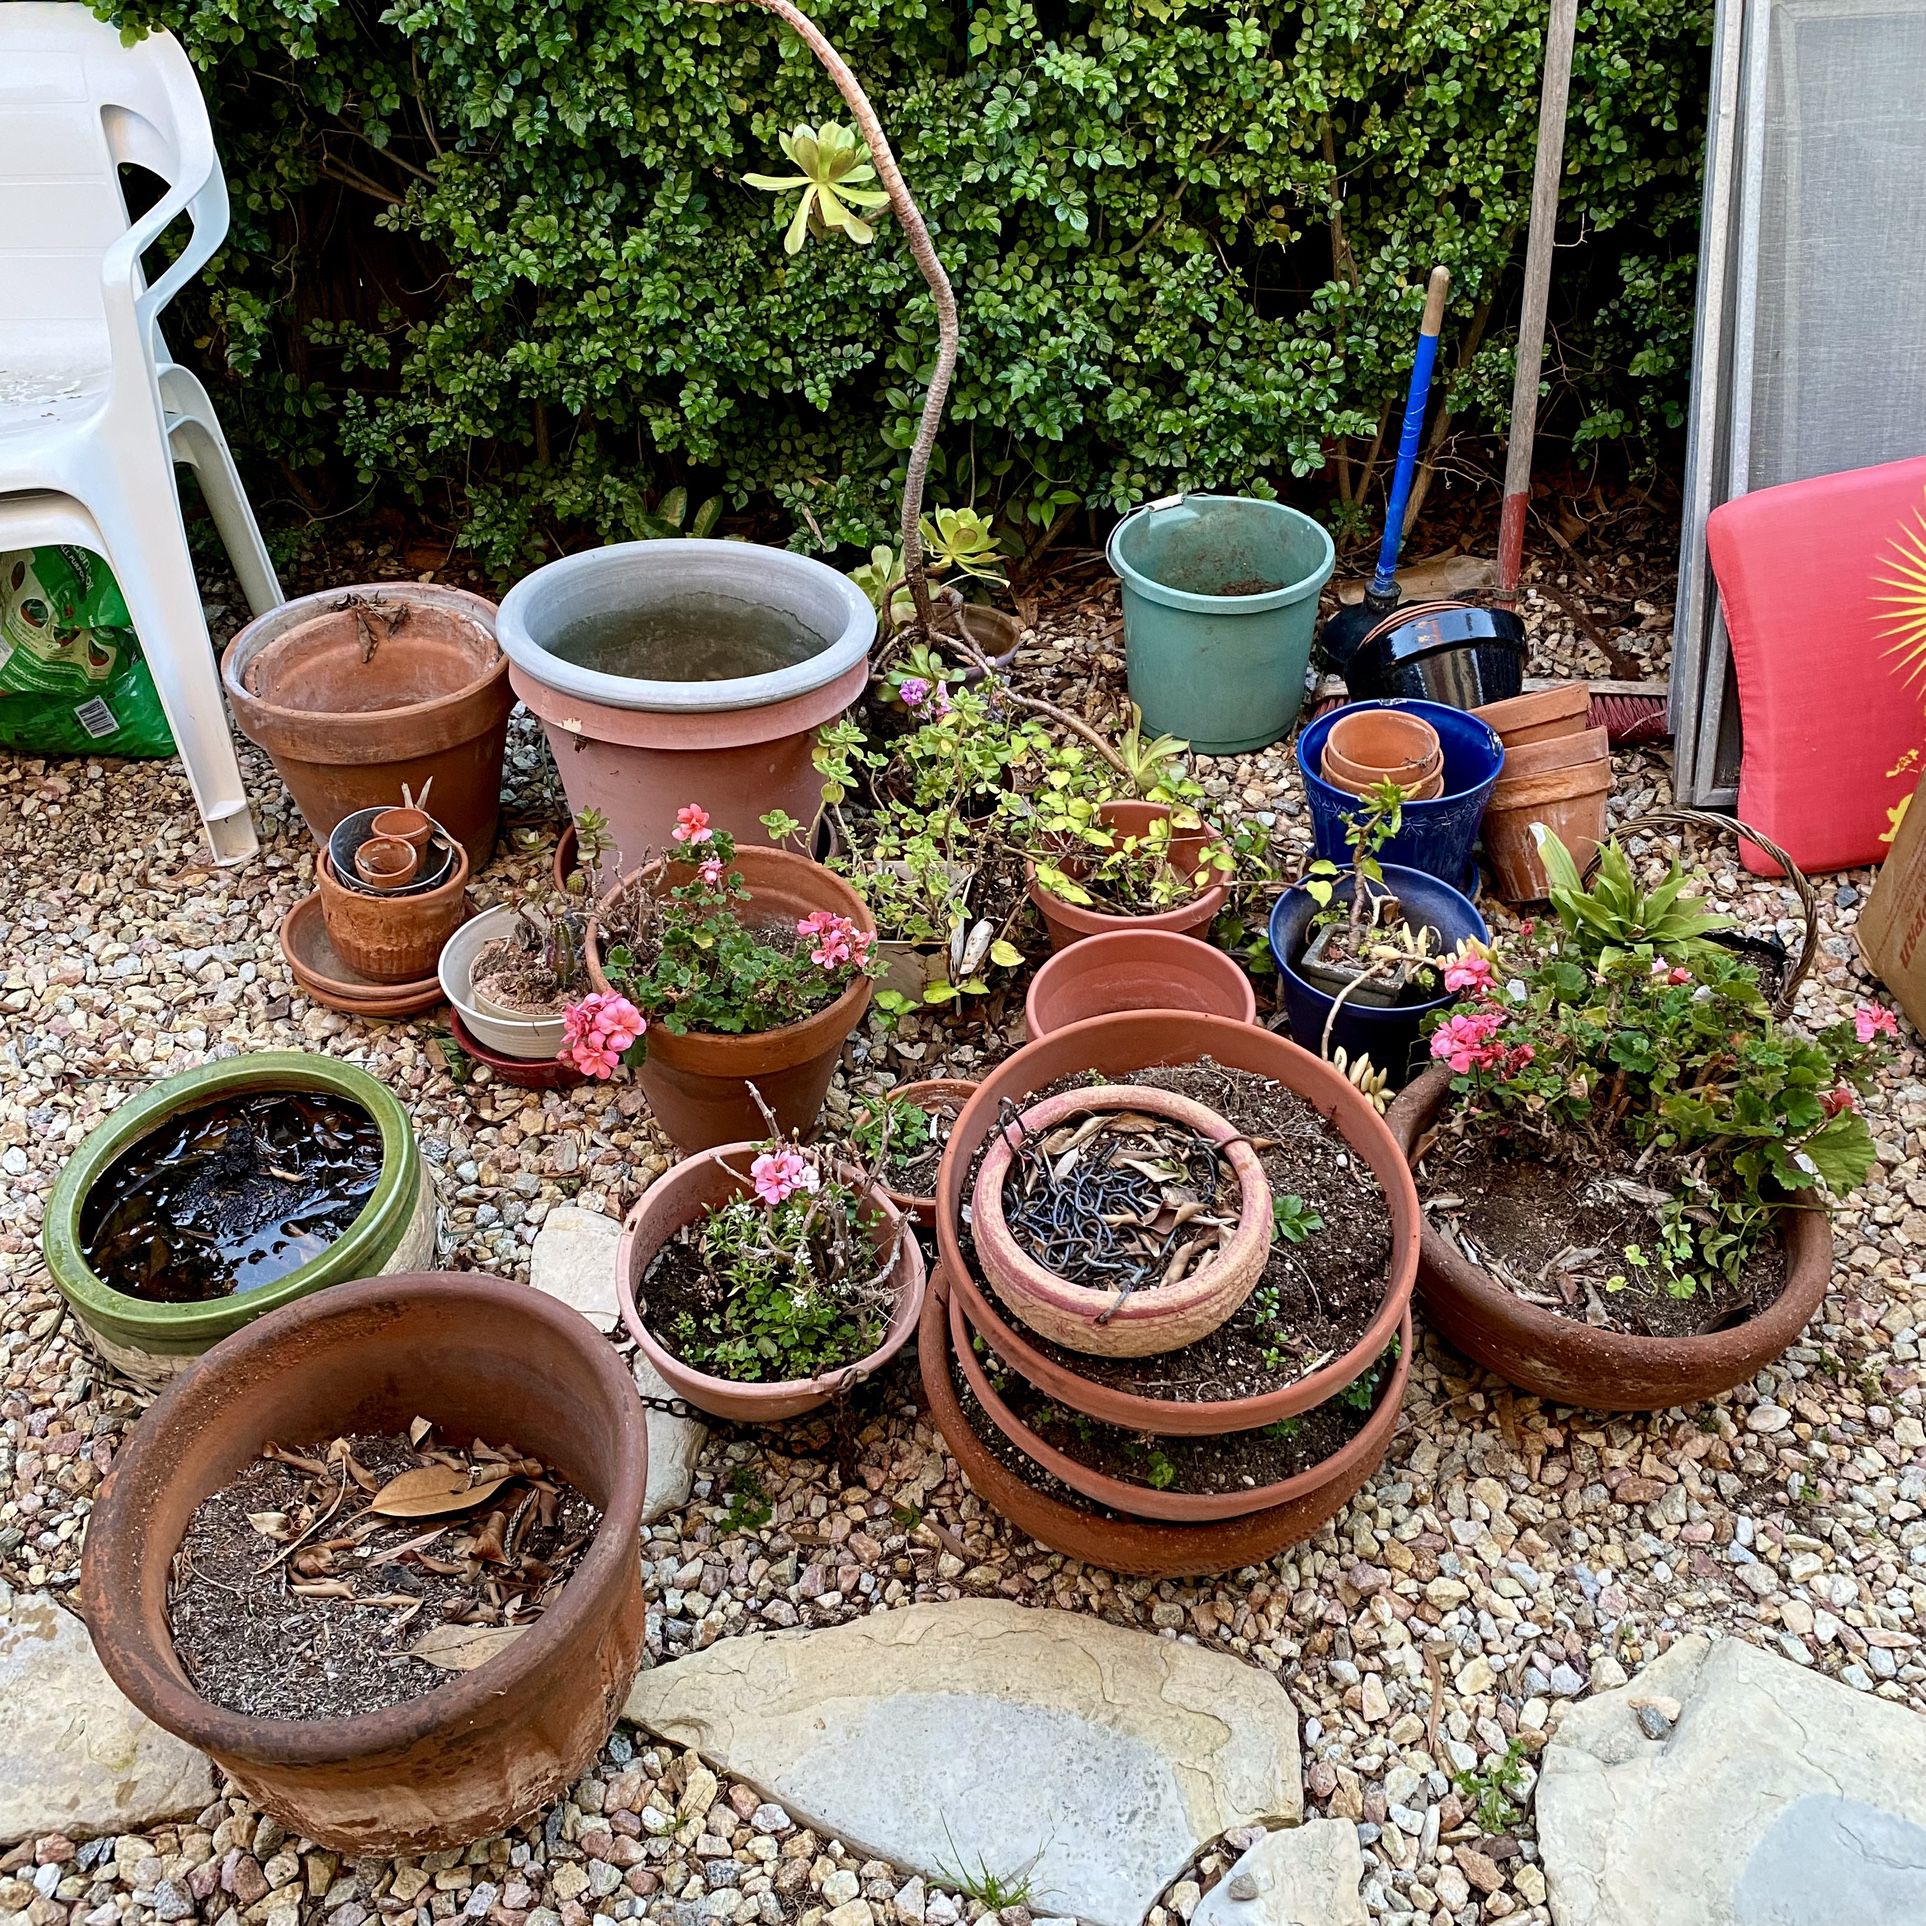 🌿 LOTS OF POTS ‼️ MANY SIZES - For Garden, Yard, Patio - Potted Flowers, Plants- Ceramic, Terracotta - Small/Medium/Large Pots